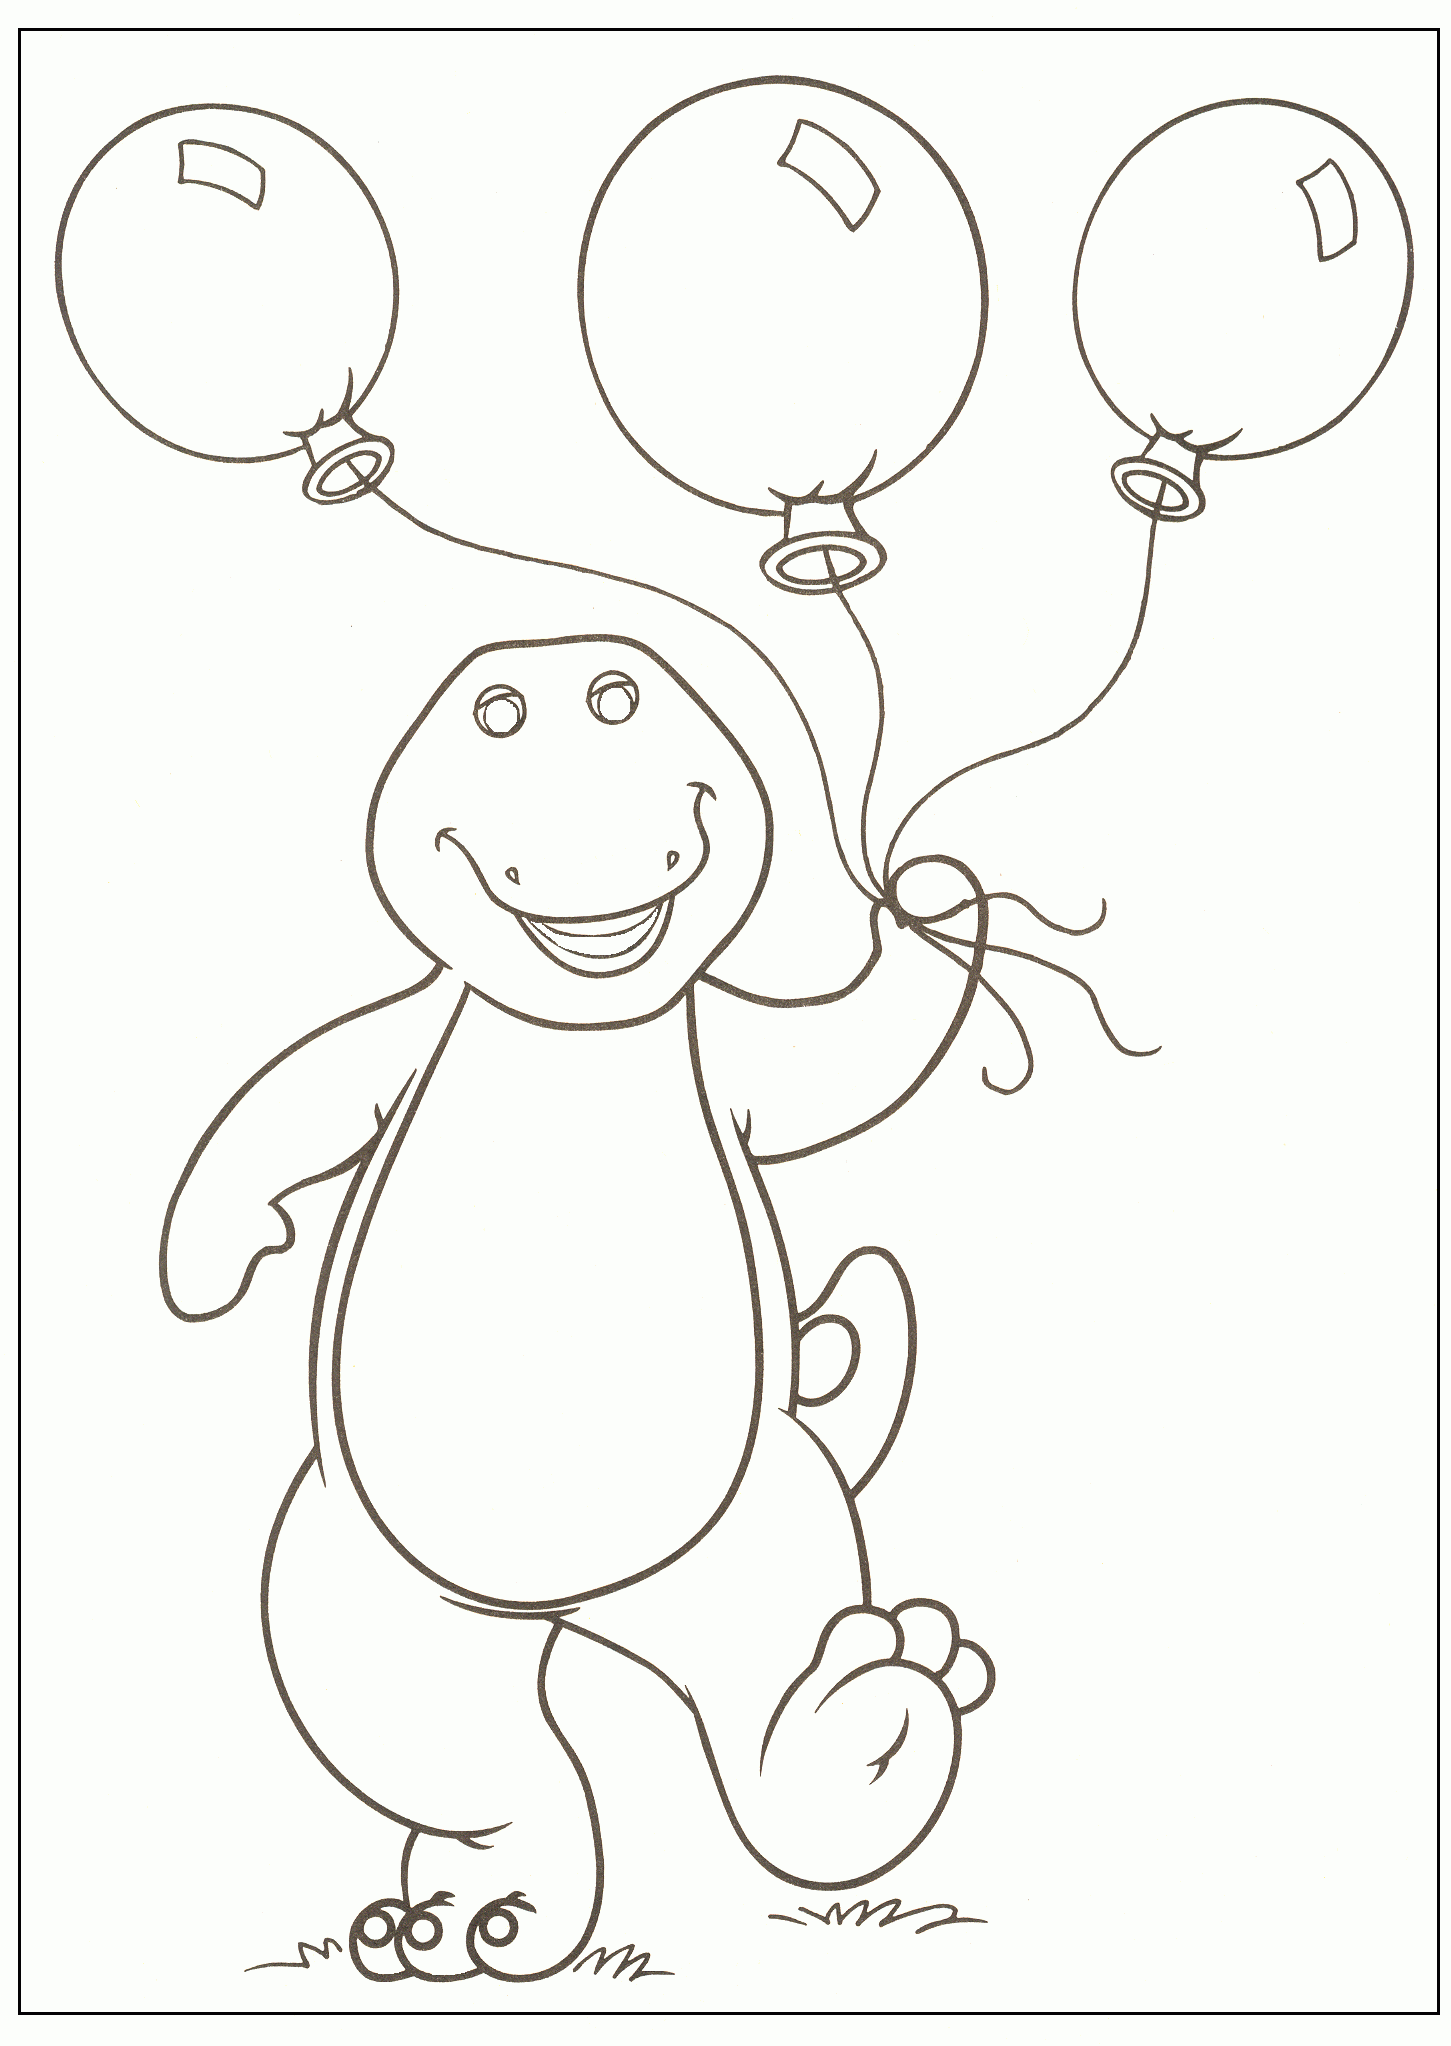 Barney and Friends Coloring Pages TV Film Barney To Print 2 Printable 2020 00672 Coloring4free